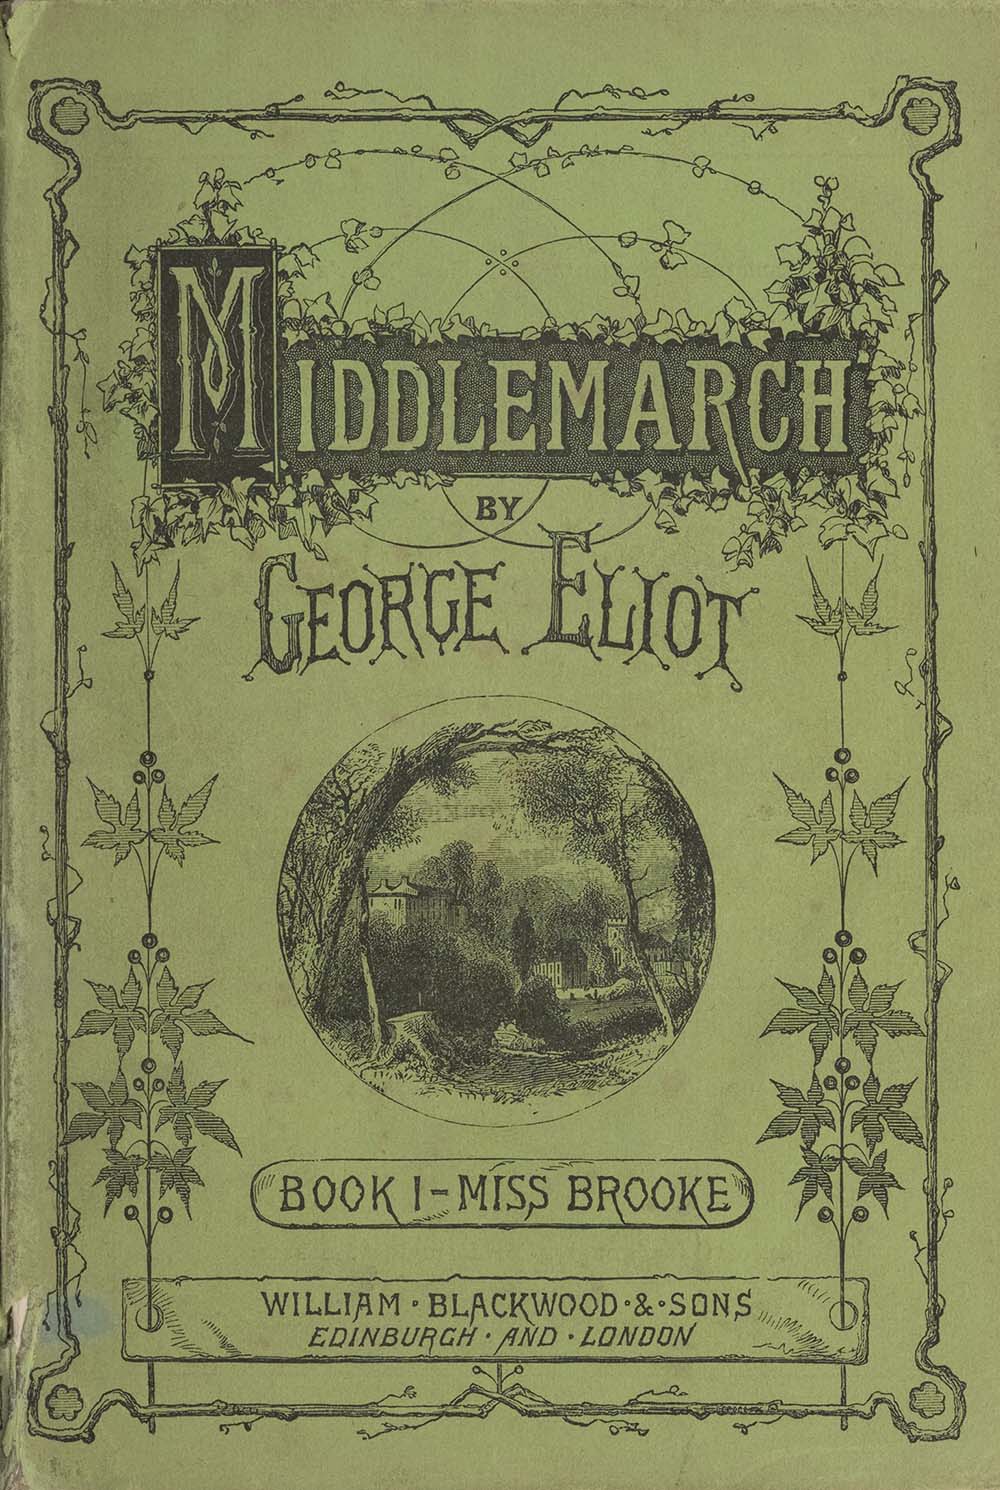 Cover of Middlemarch by George Eliot, 1871. 